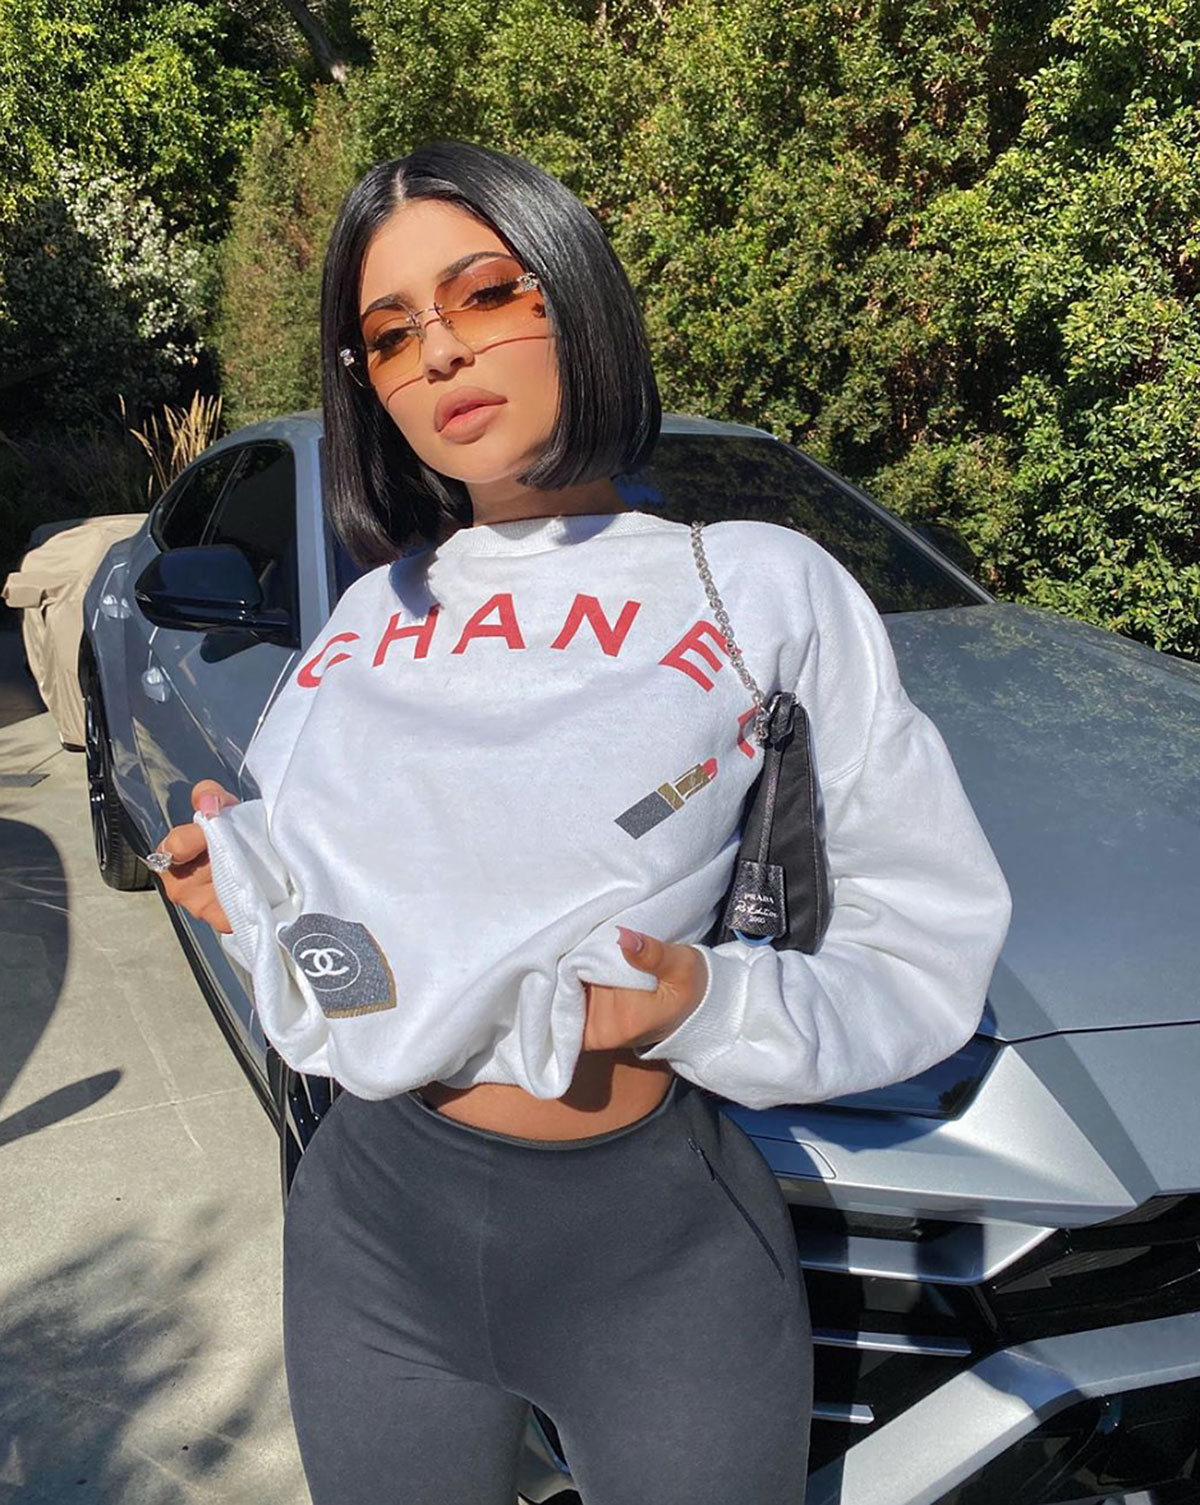 Kylie Jenner Matches Outfits to People, Cars and Other Surroundings